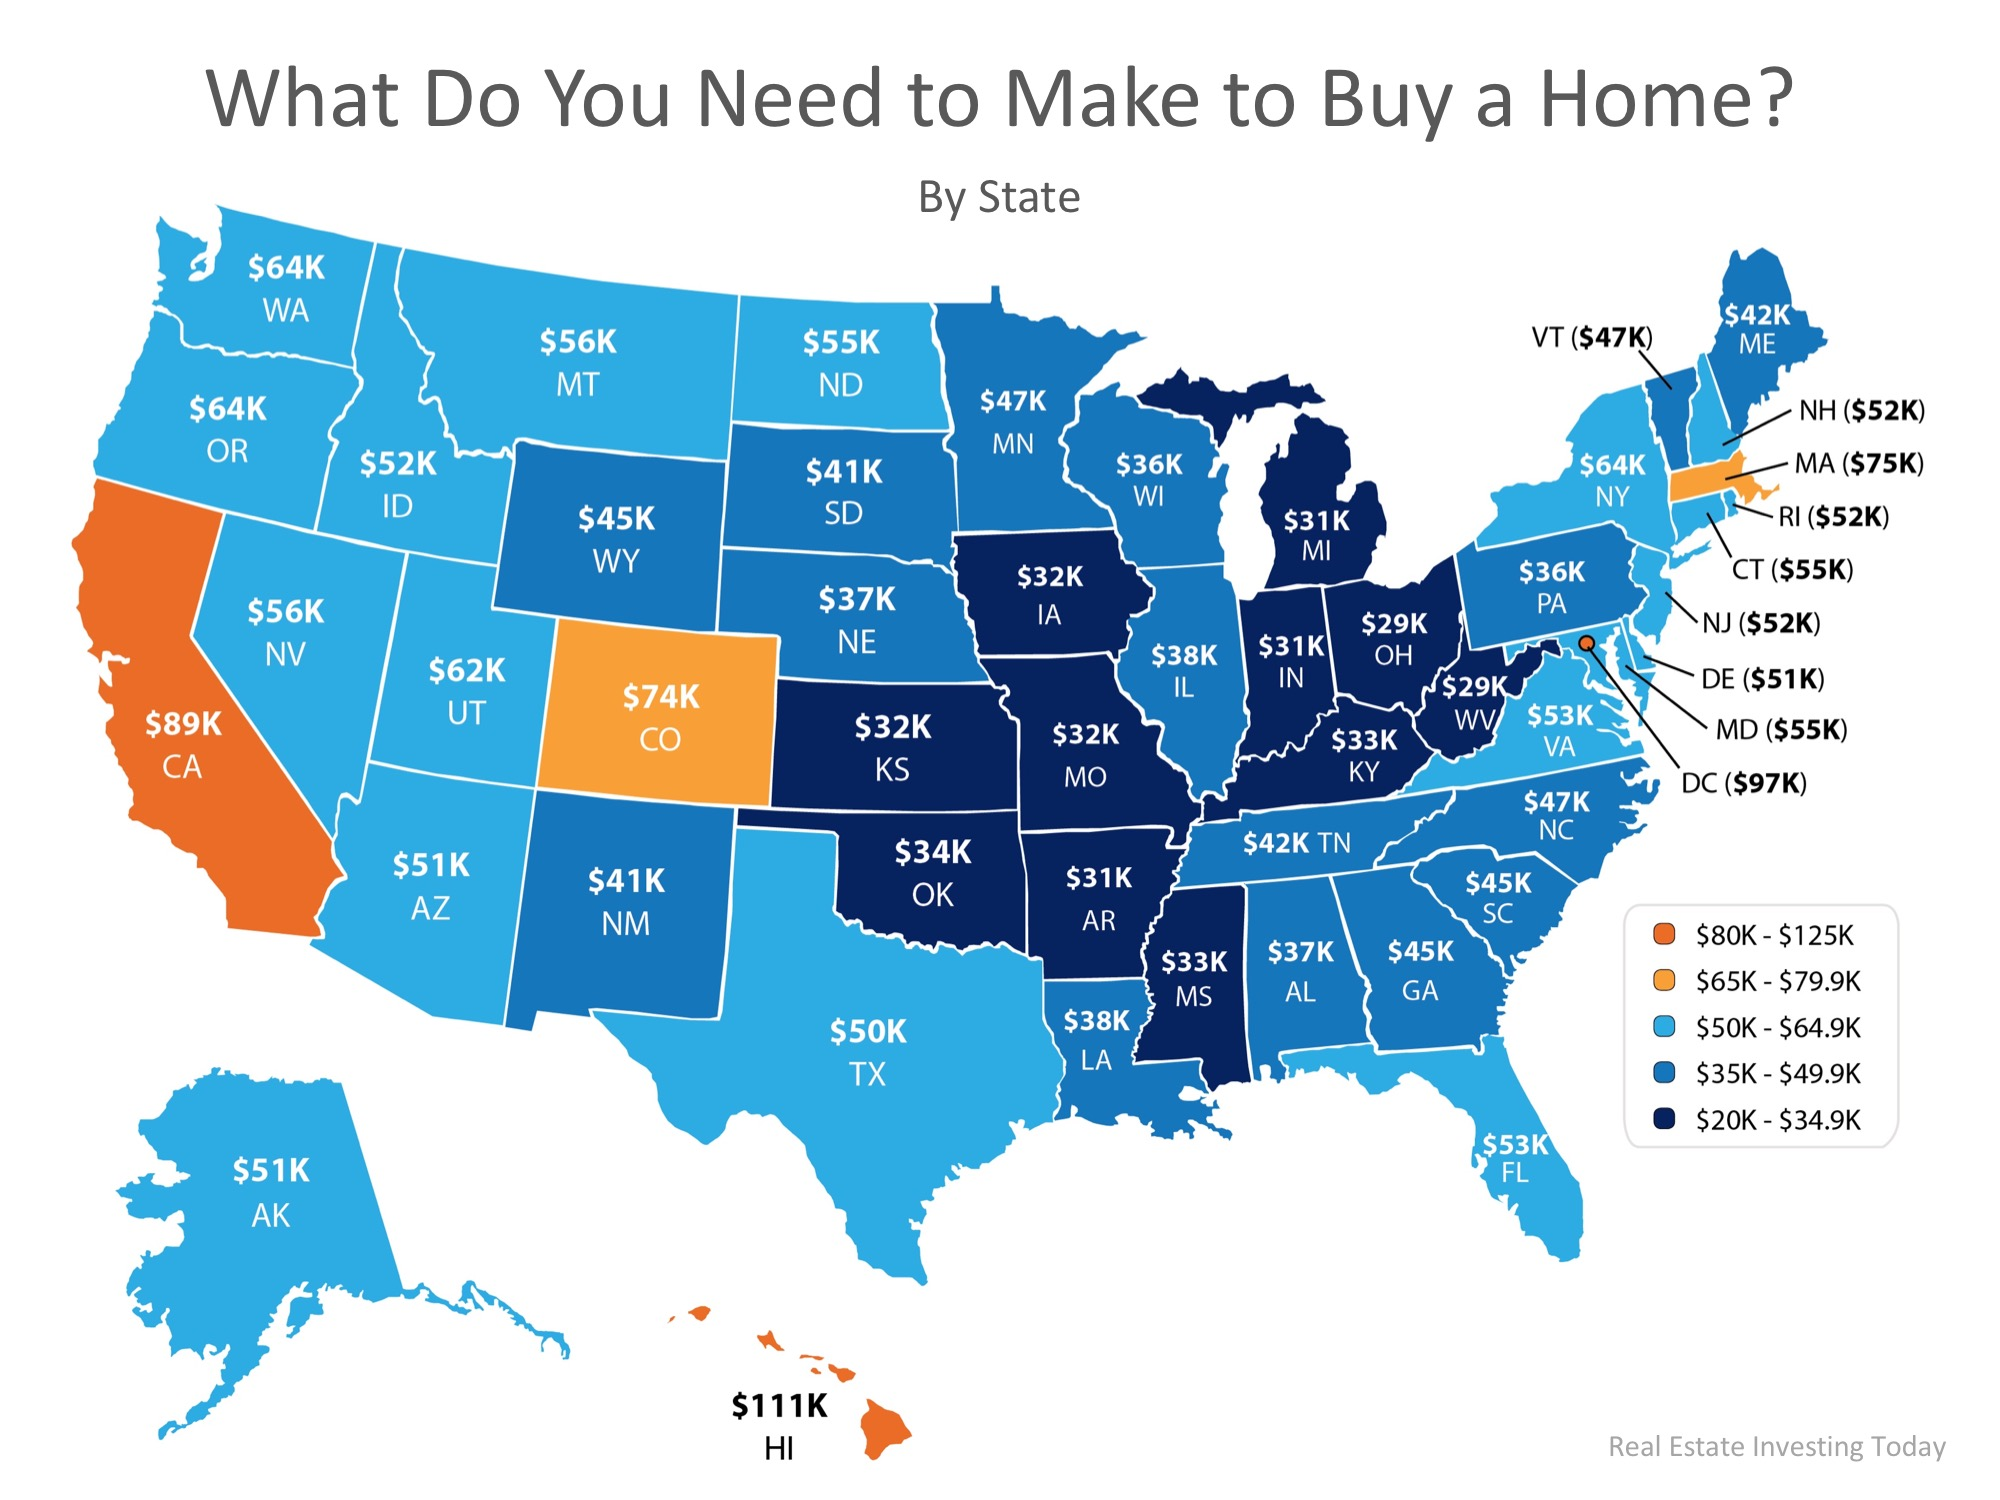 How Much Do You Need to Make to Buy a Home in Your State?